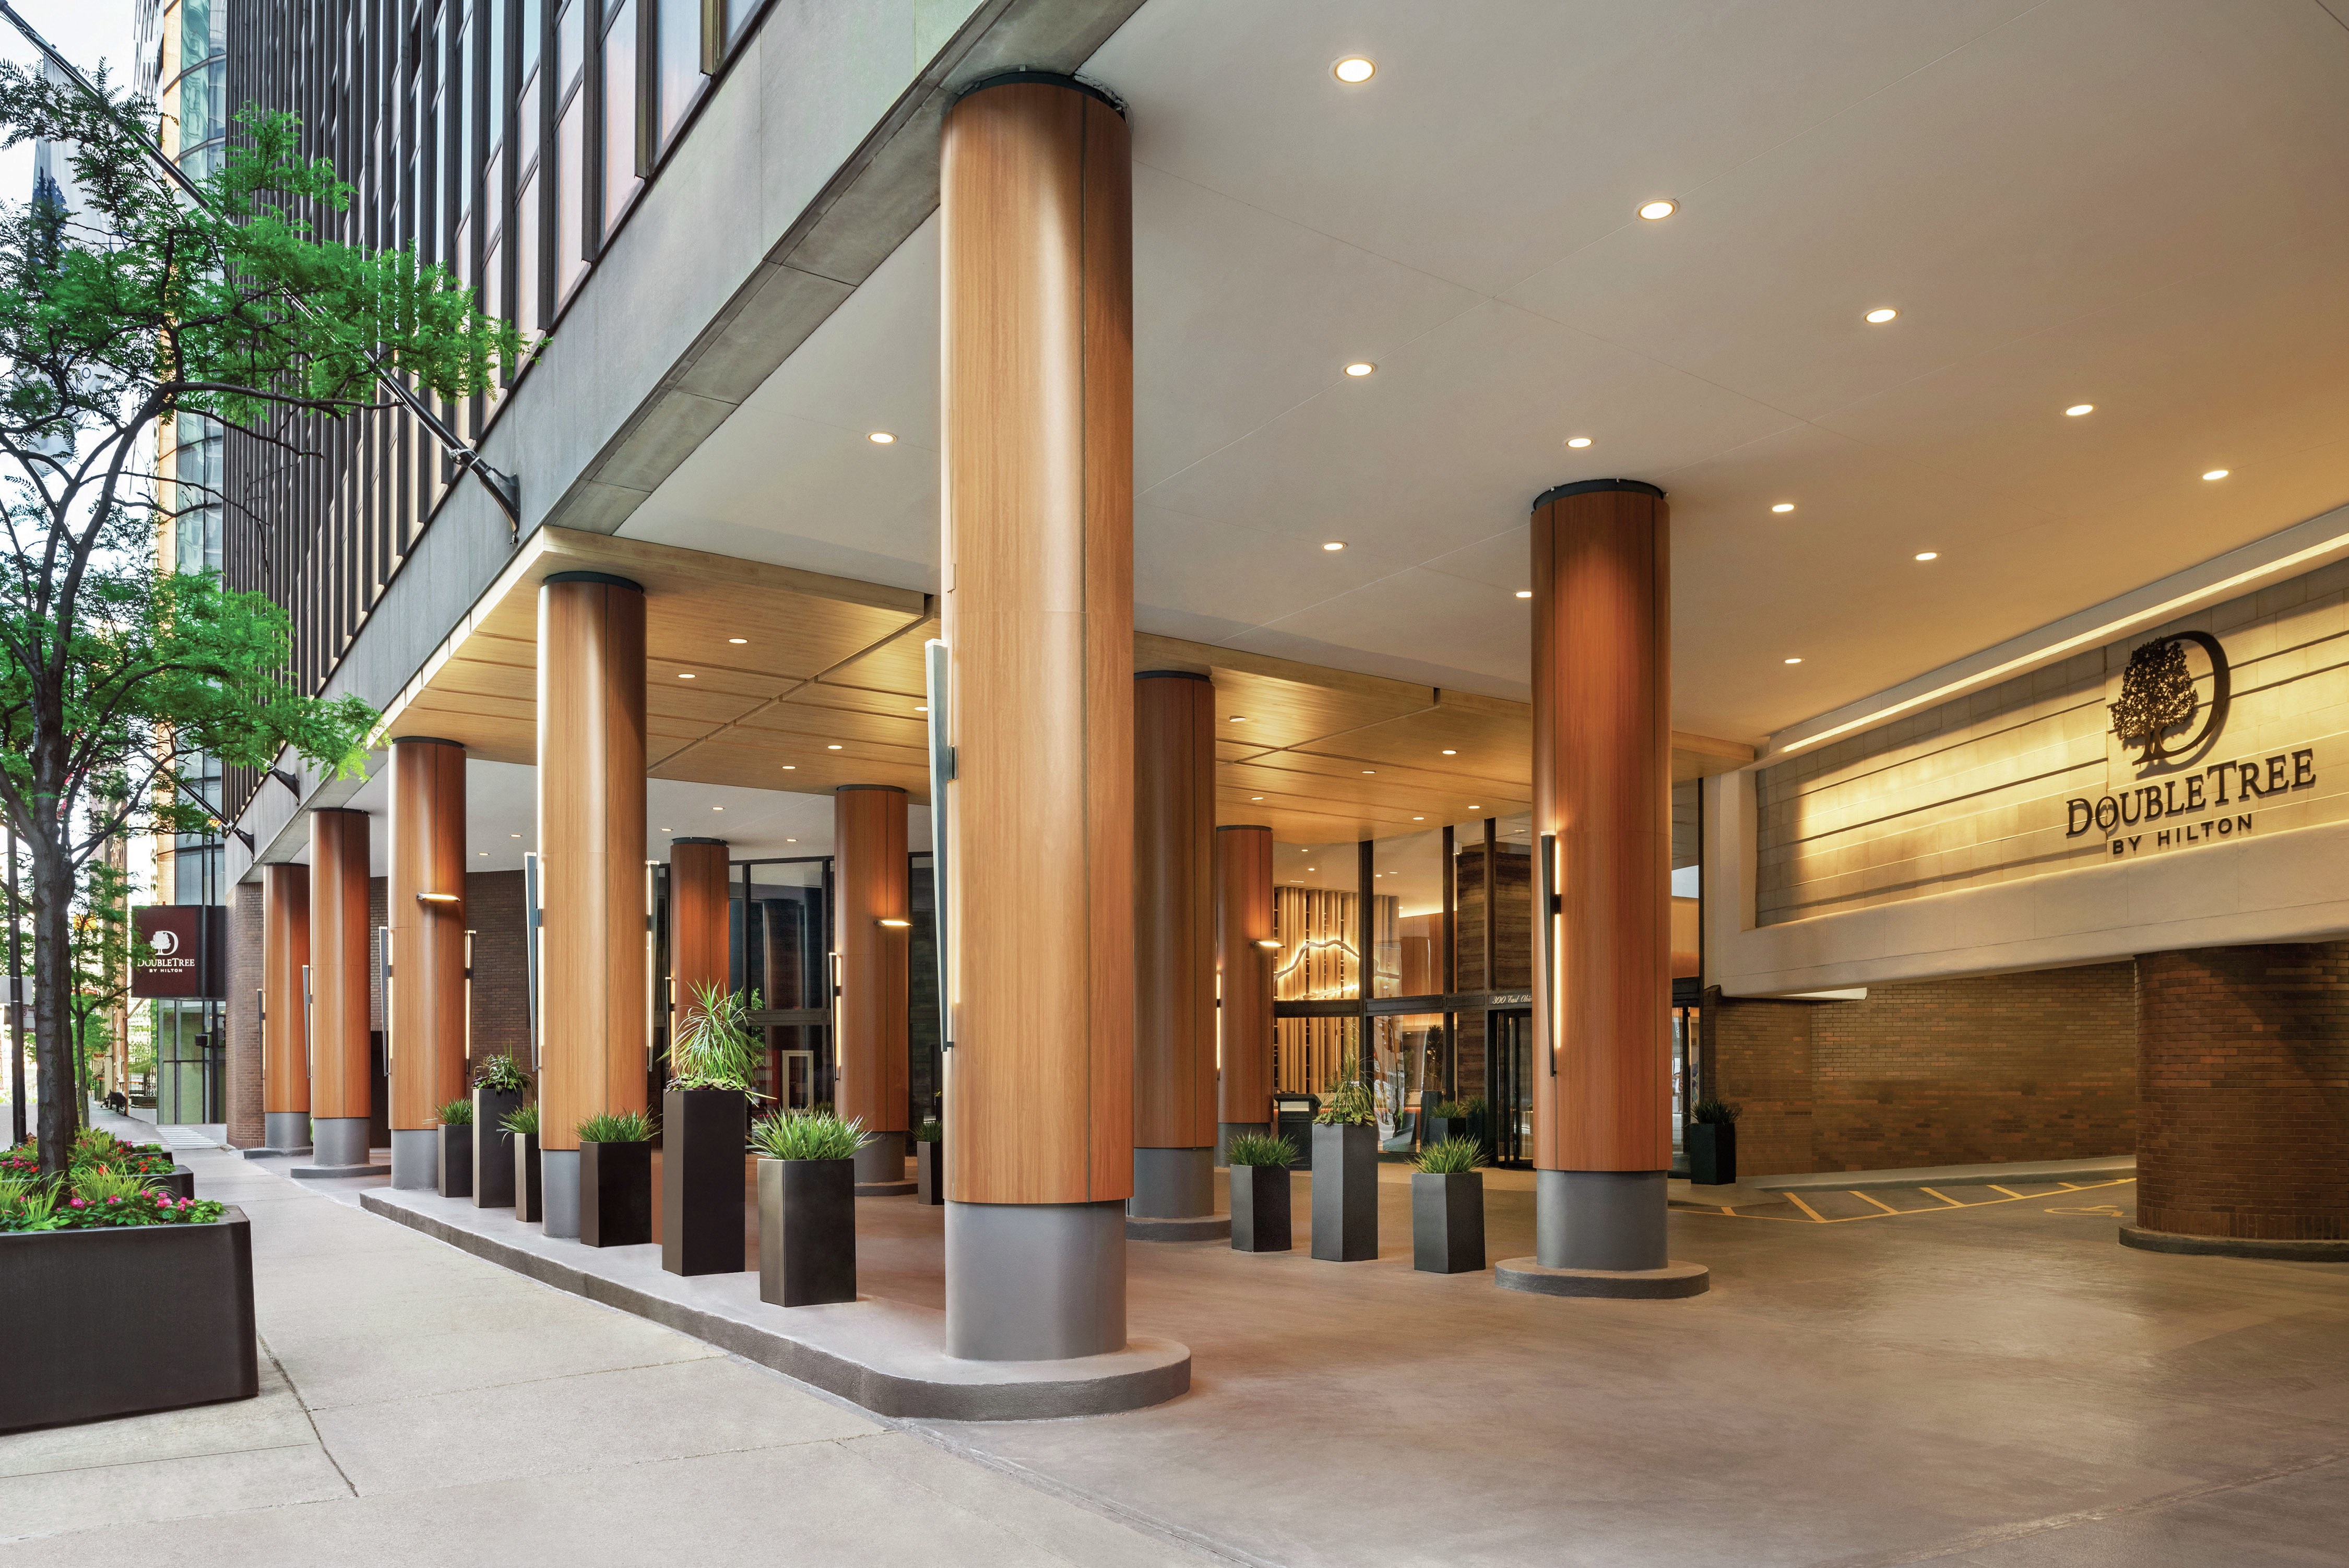 Hotel entrance with pillars and plants